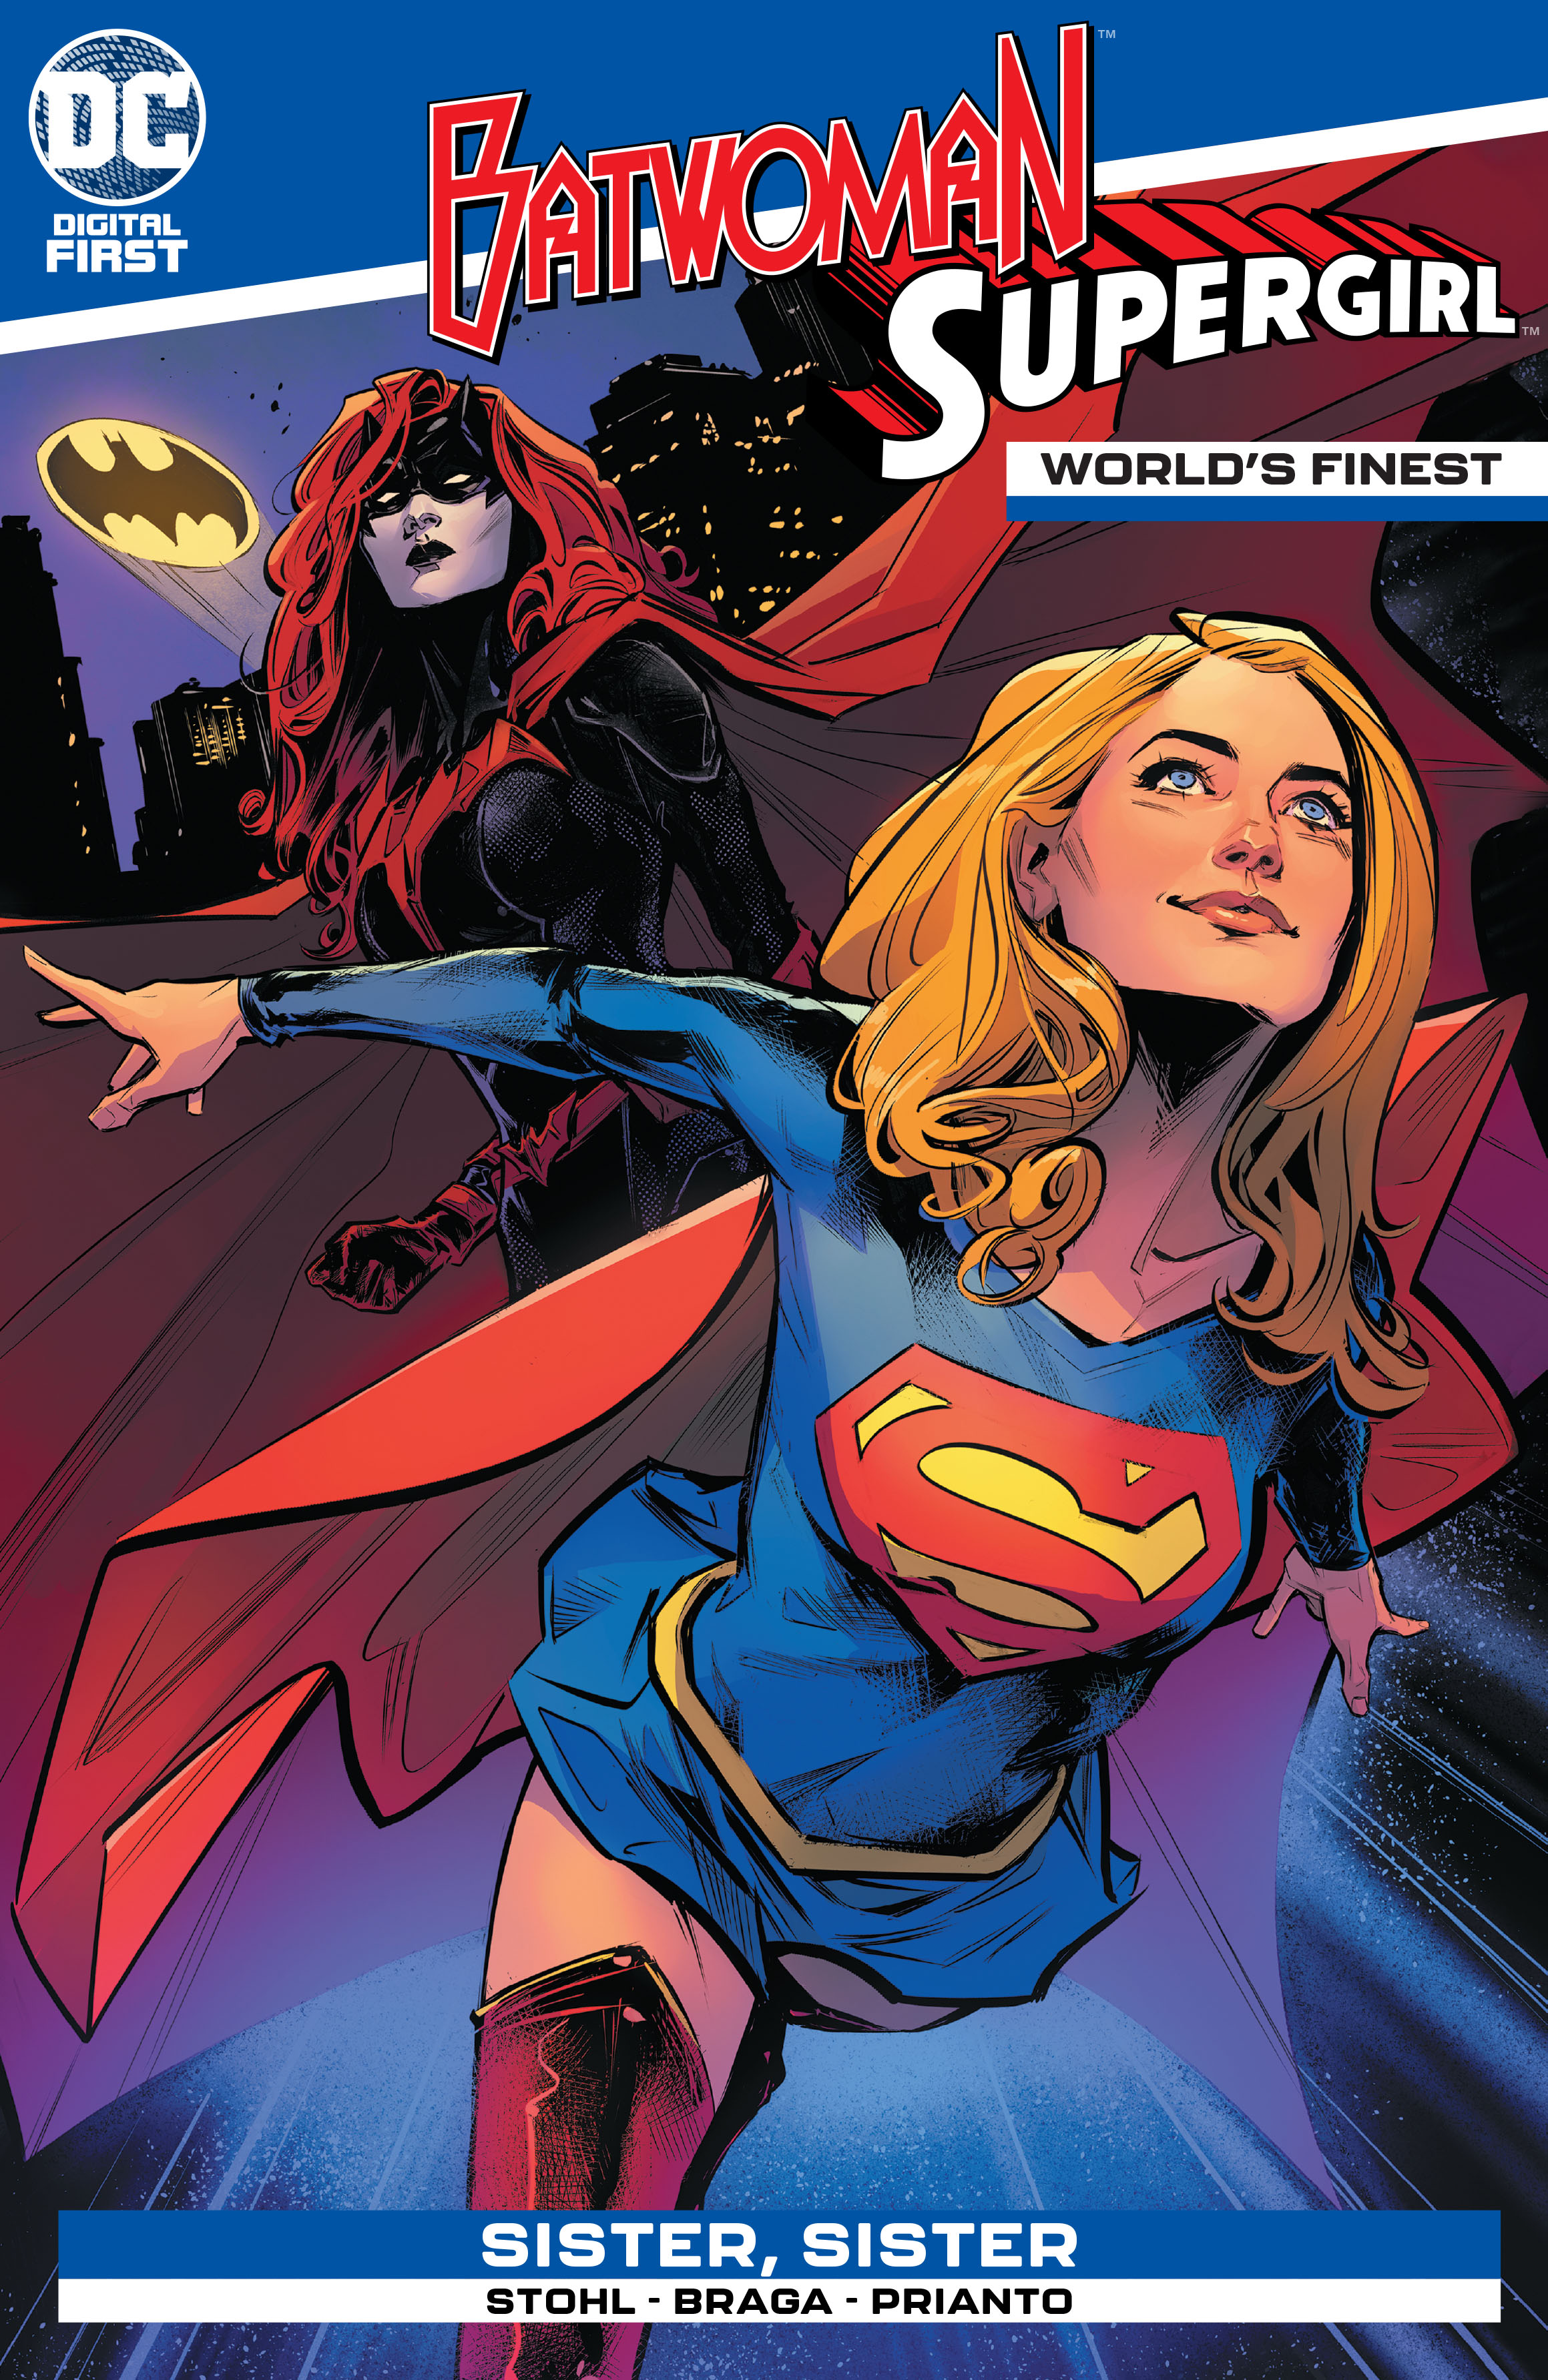 World's Finest: Batwoman and Supergirl (2020-): Chapter 1 - Page 1